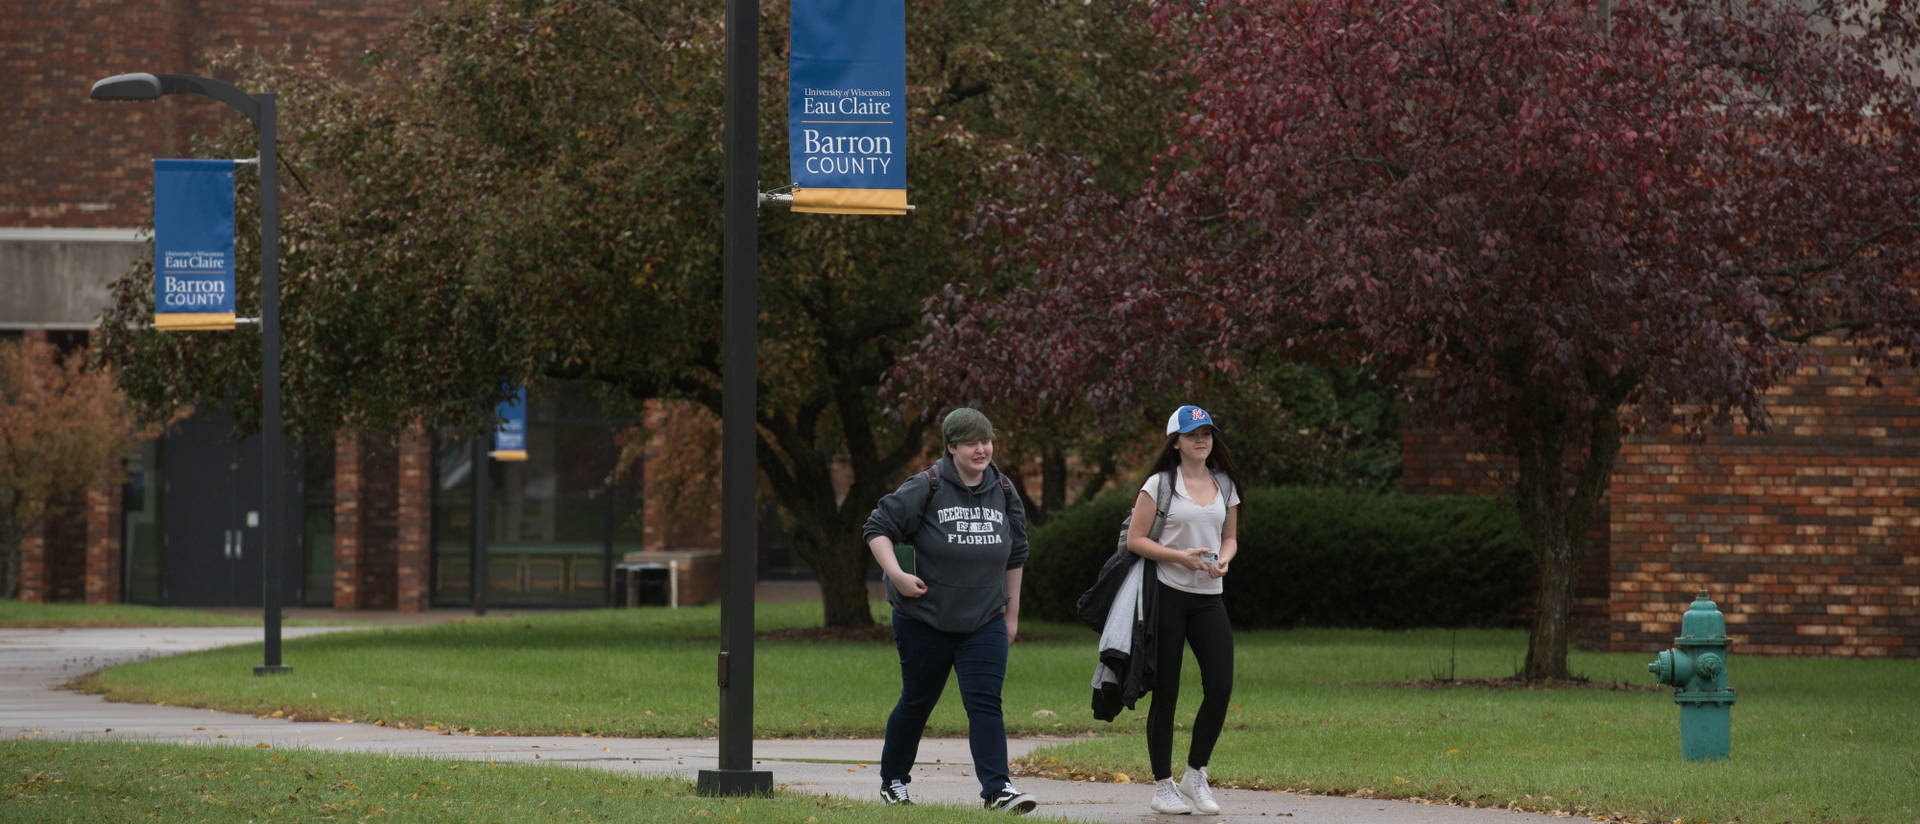 Students walking on UW-Eau Claire Barron County Campus